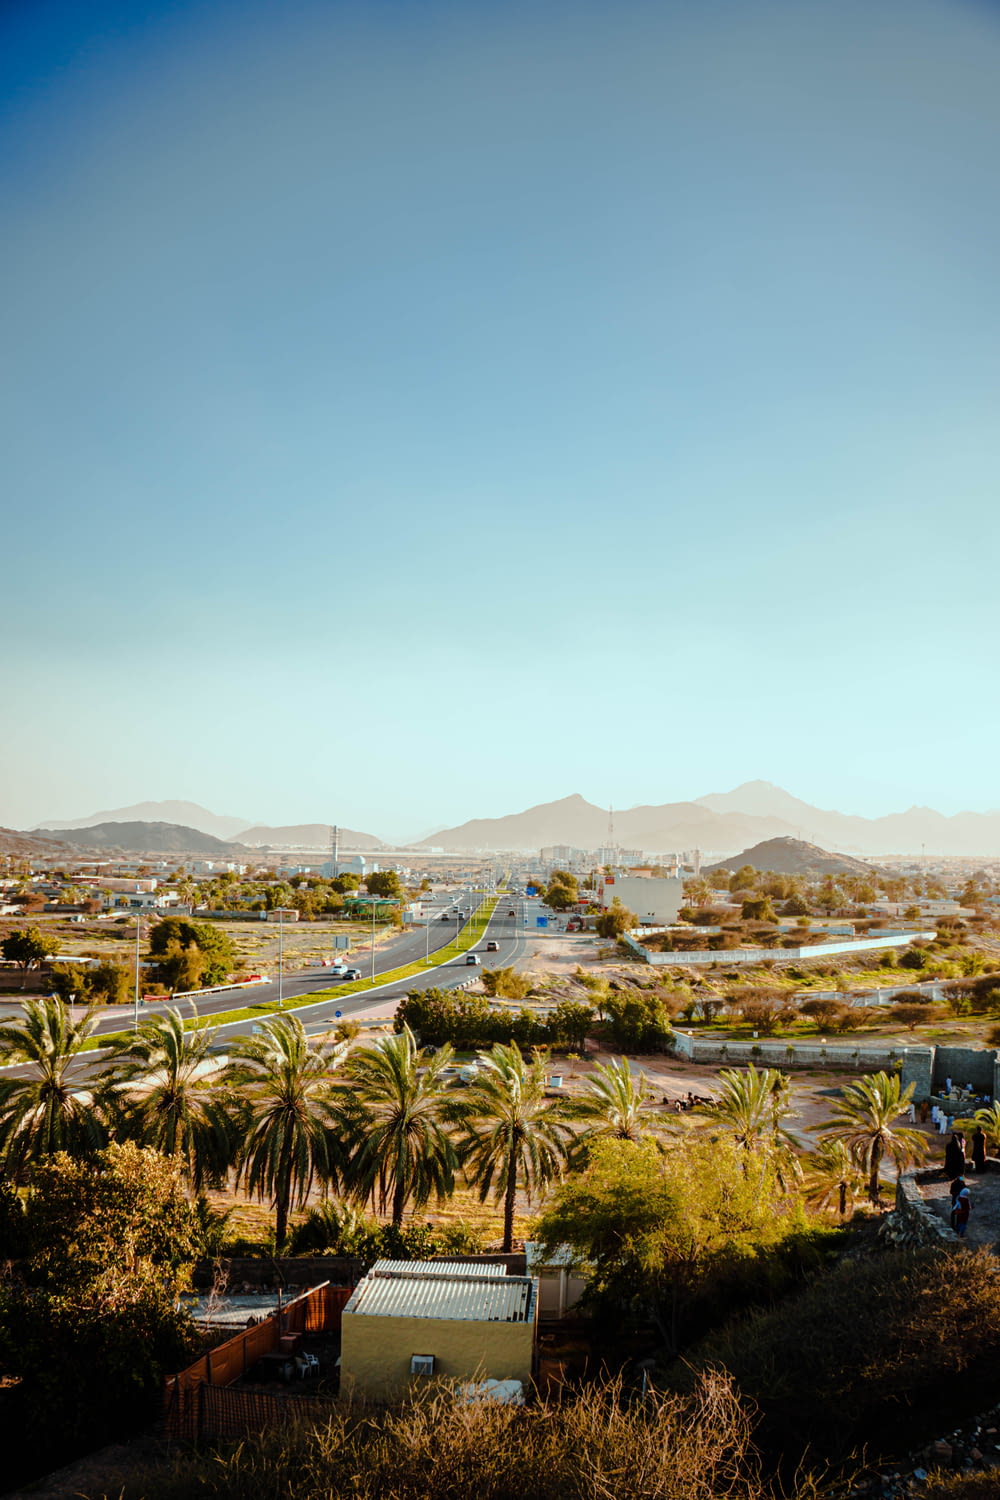 a view of a city with palm trees and mountains in the background